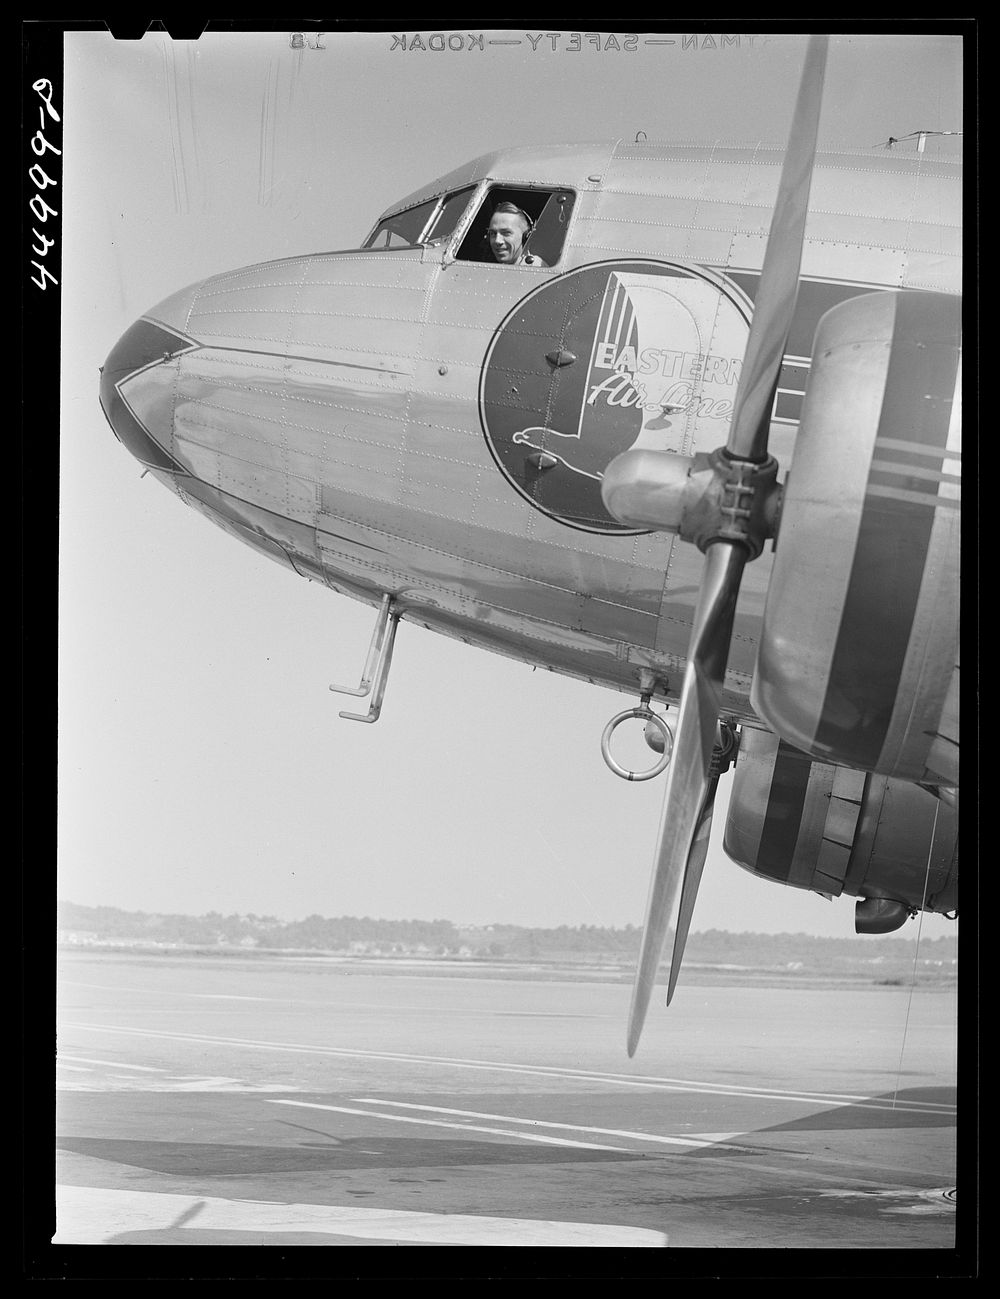 Waiting for the signal to take off. Washington, D.C. municipal airport. Sourced from the Library of Congress.